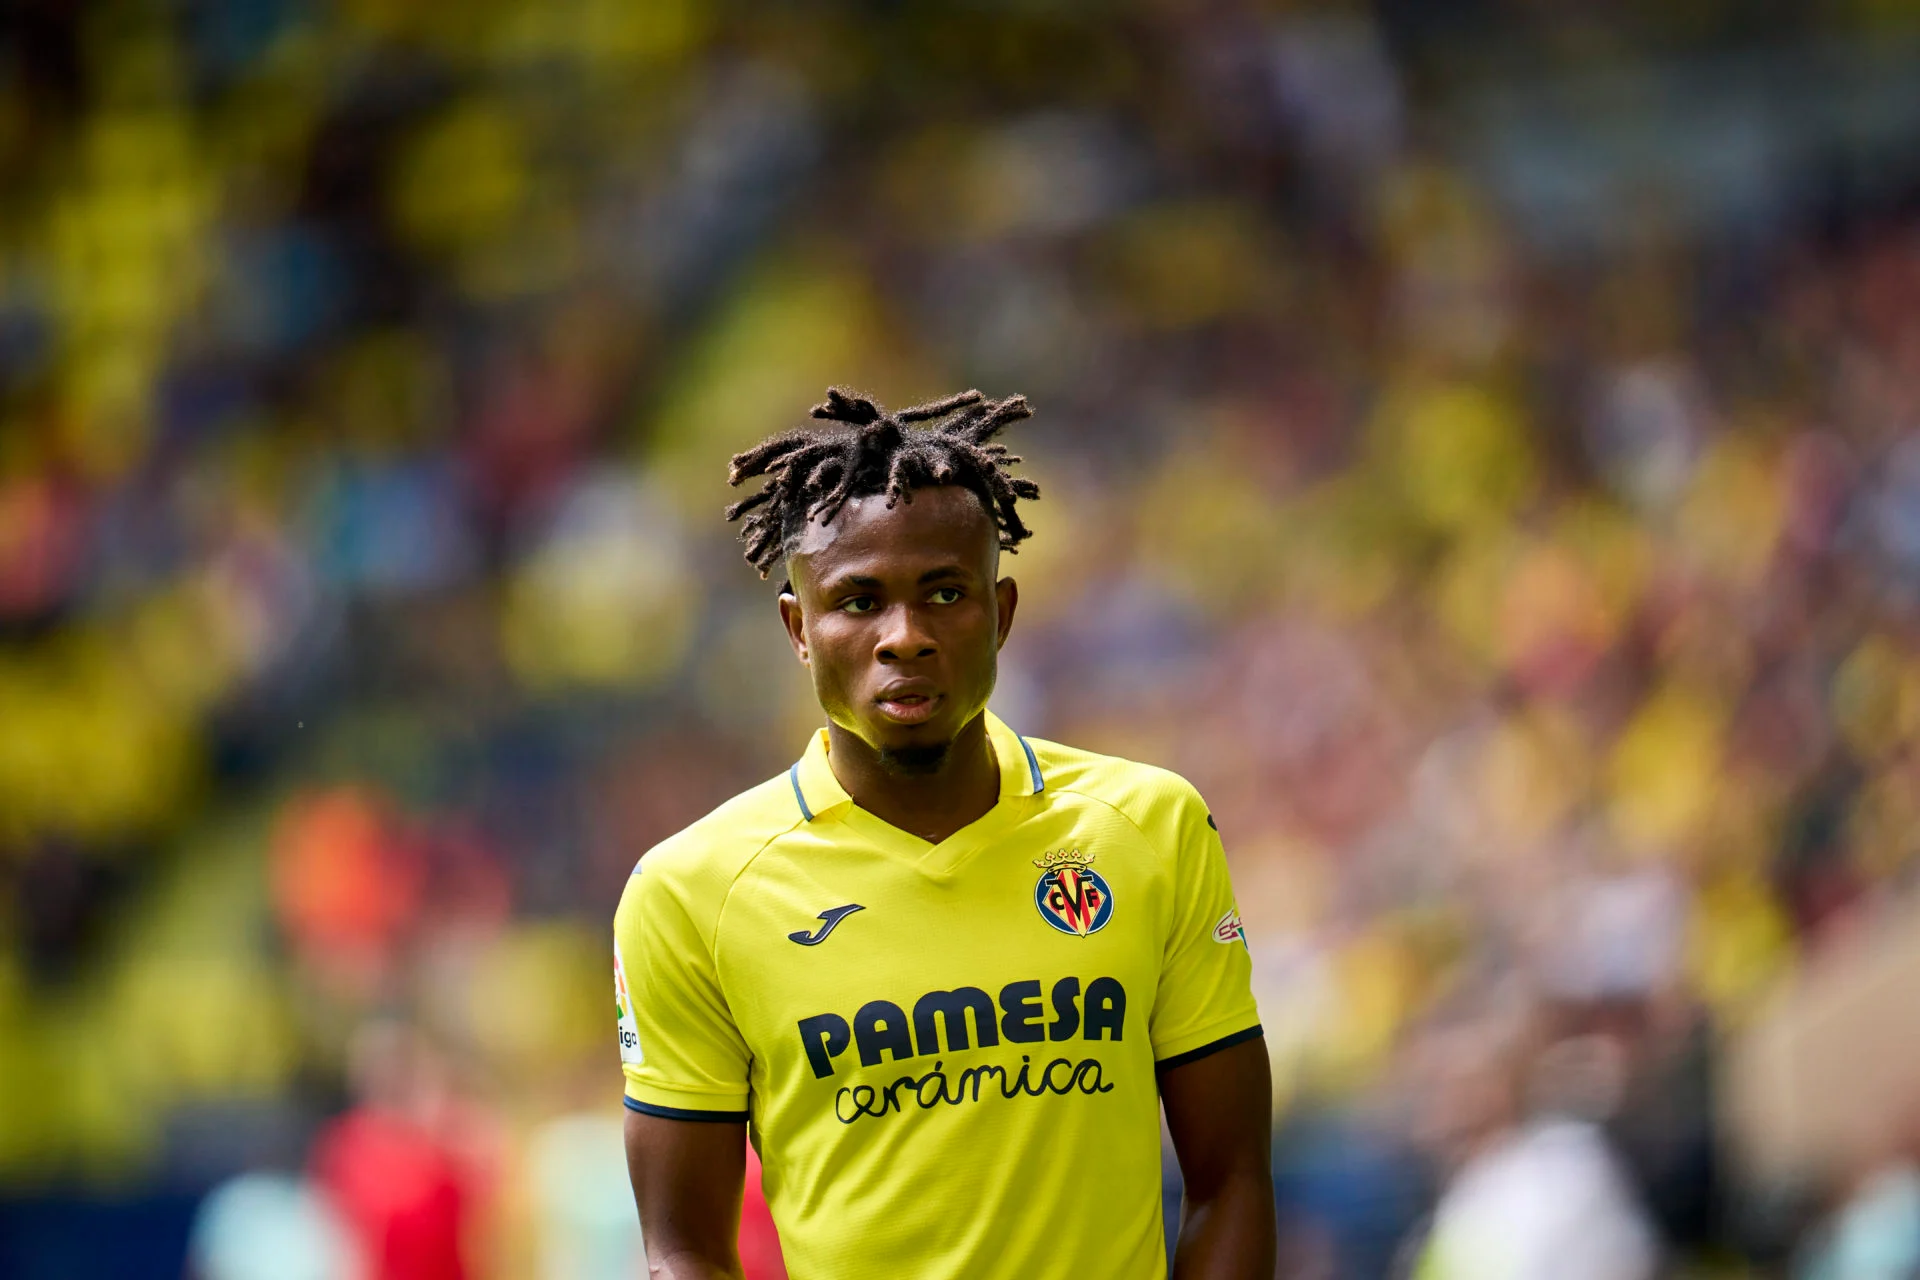 After Milan and Villarreal came to terms earlier in the week, Samuel Chukwueze touched down in Italy Wednesday to take the medicals and put pen to paper.